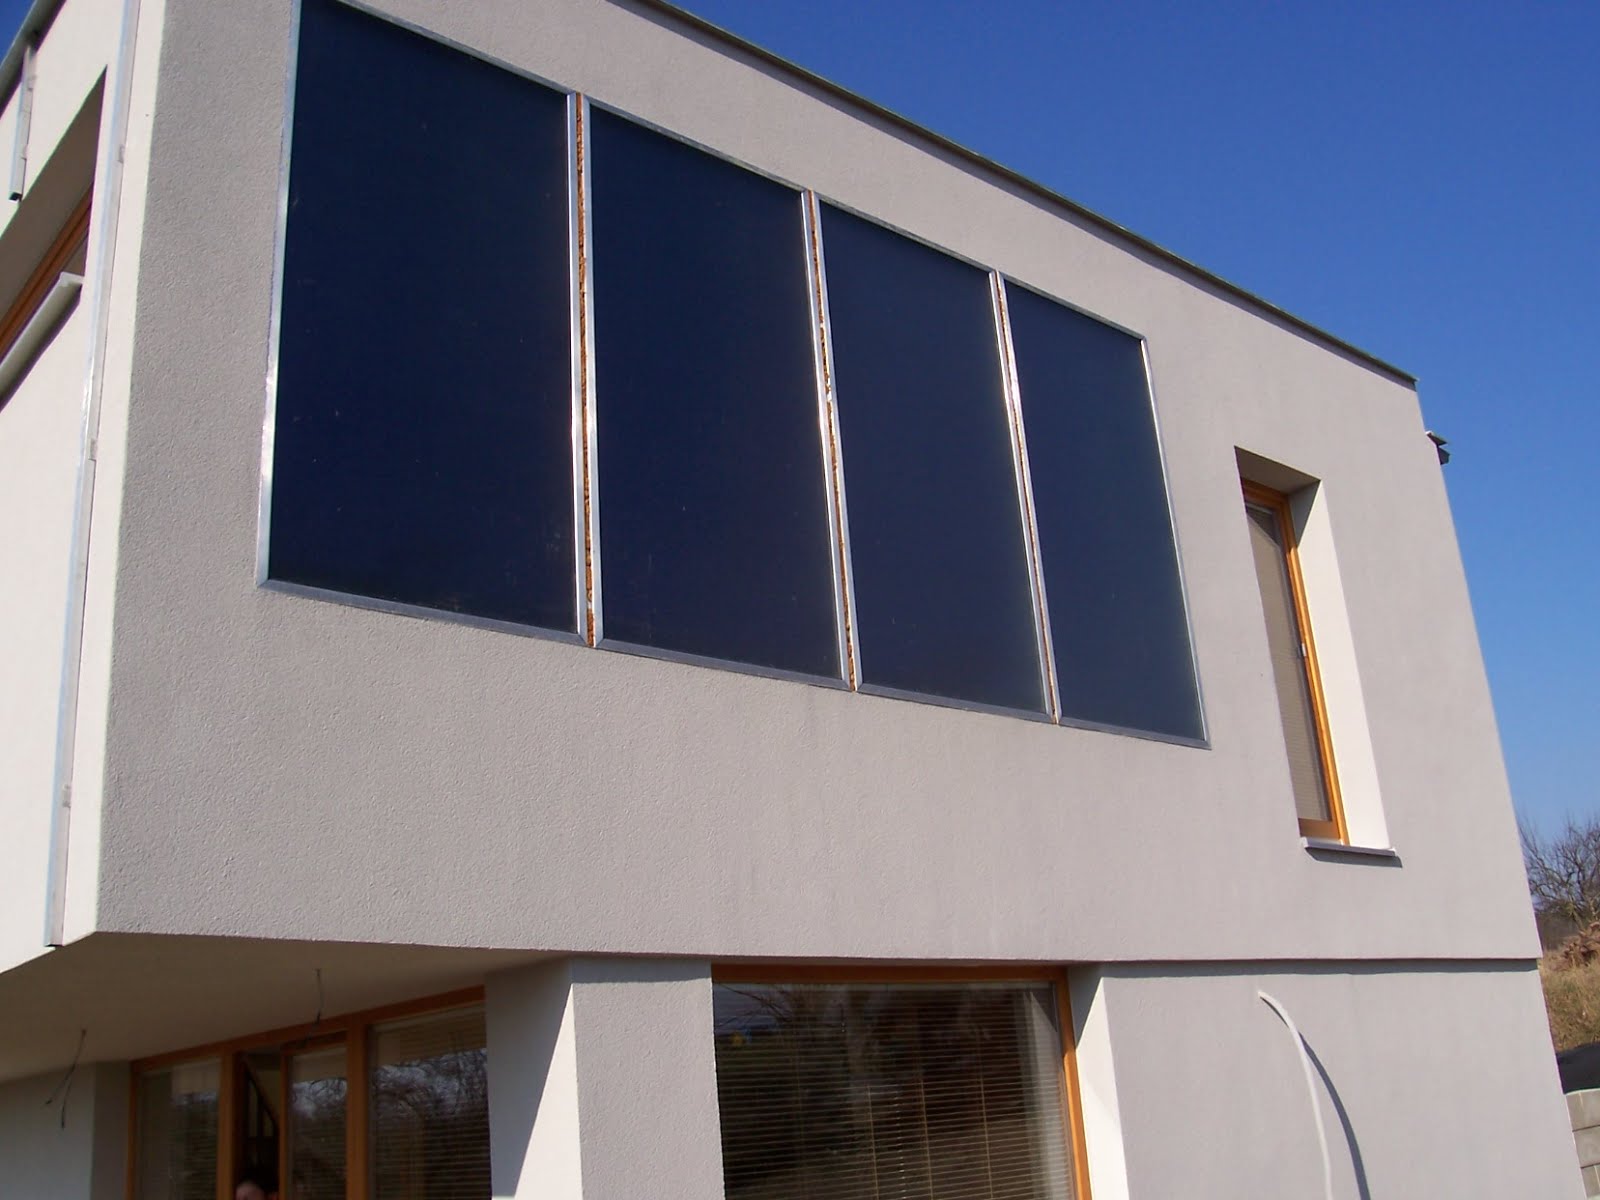 An example of a vertically mounted solar-panel system.